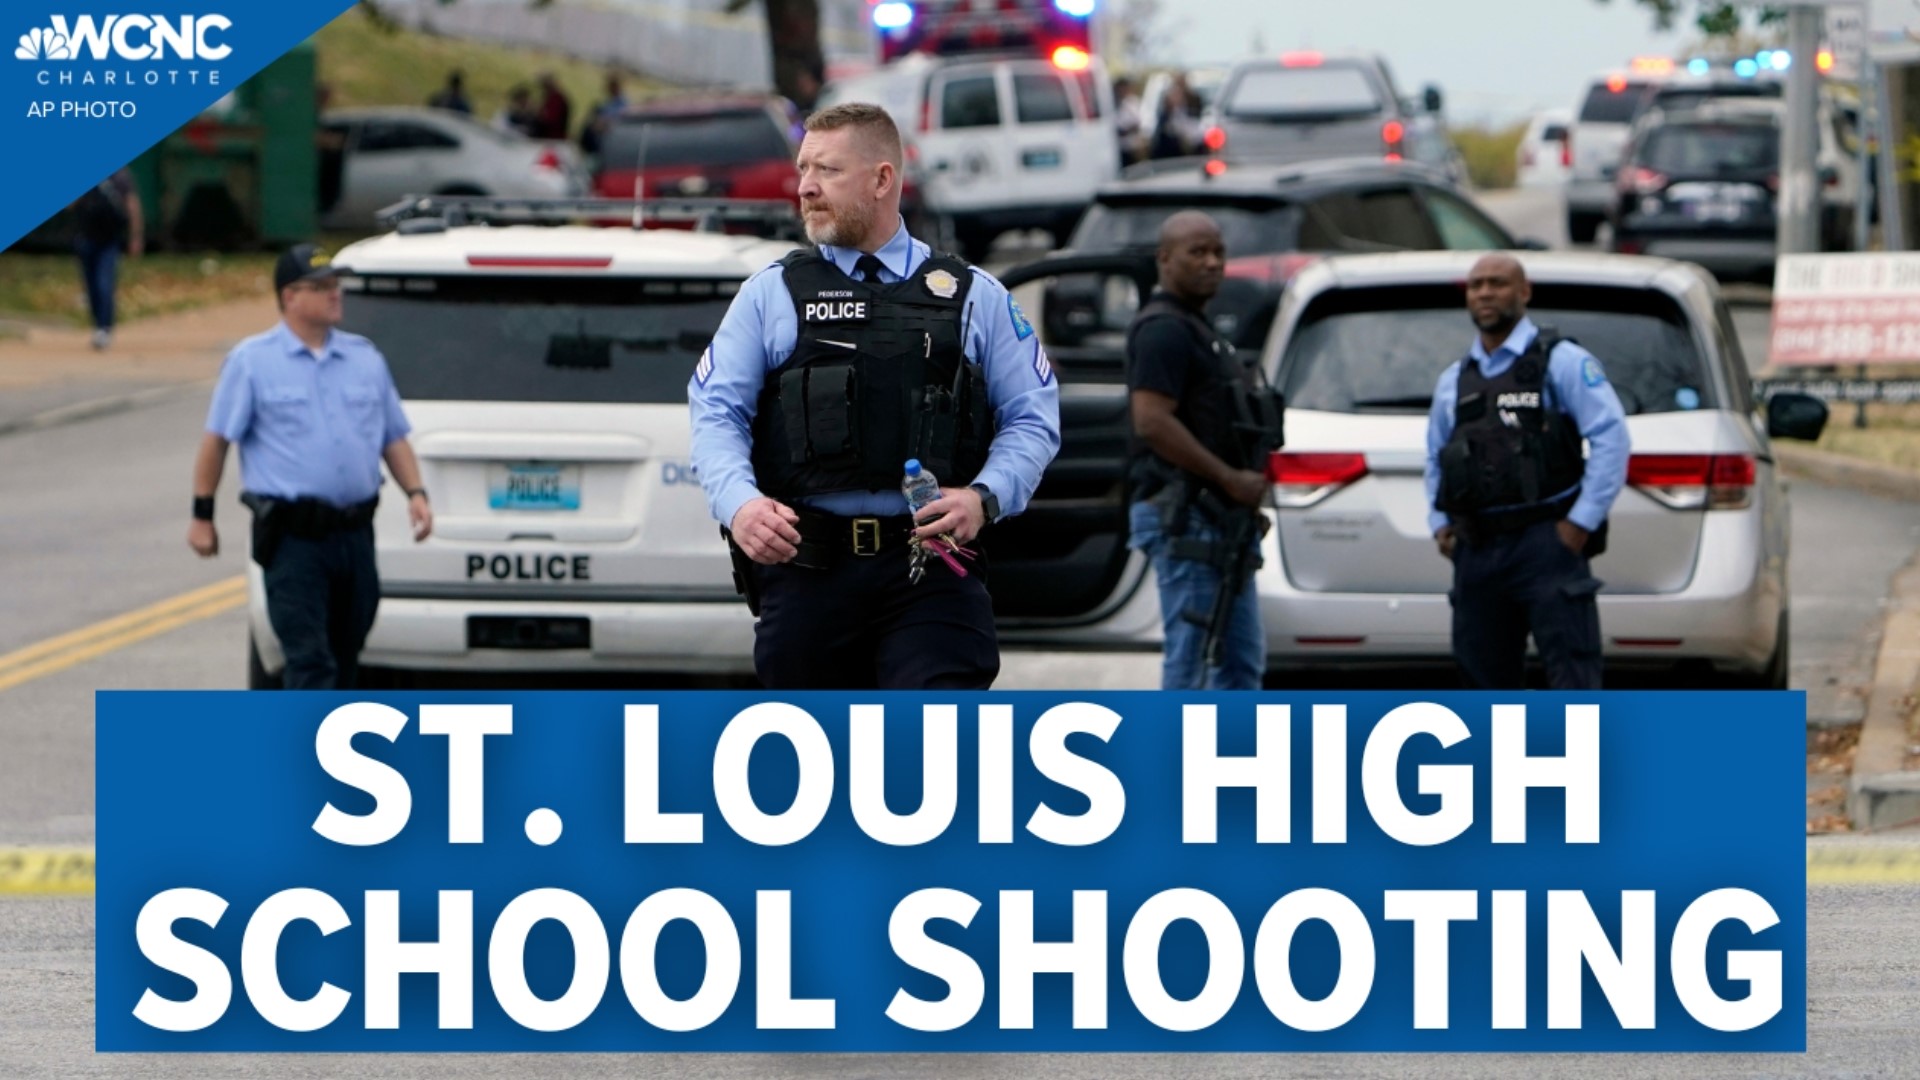 Police said there were nine total victims in the shooting. One of the victims killed in the shooting was identified as a heath teacher at the school.